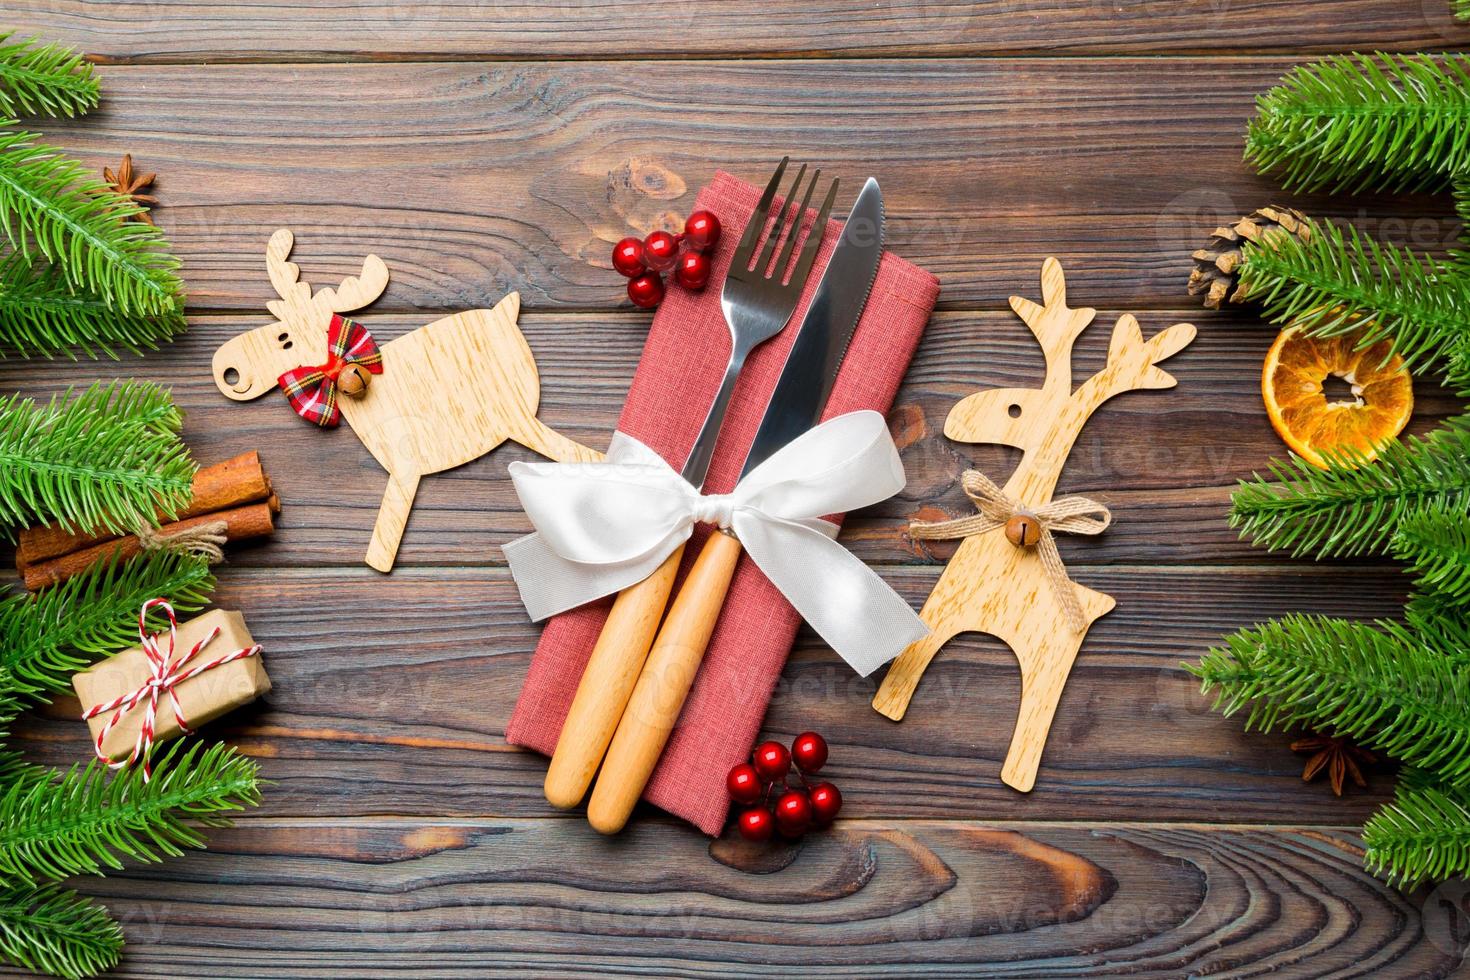 Top view of utensils on festive napkin on wooden background. Christmas decorations with dried fruits and cinnamon. Close up of New year dinner concept photo